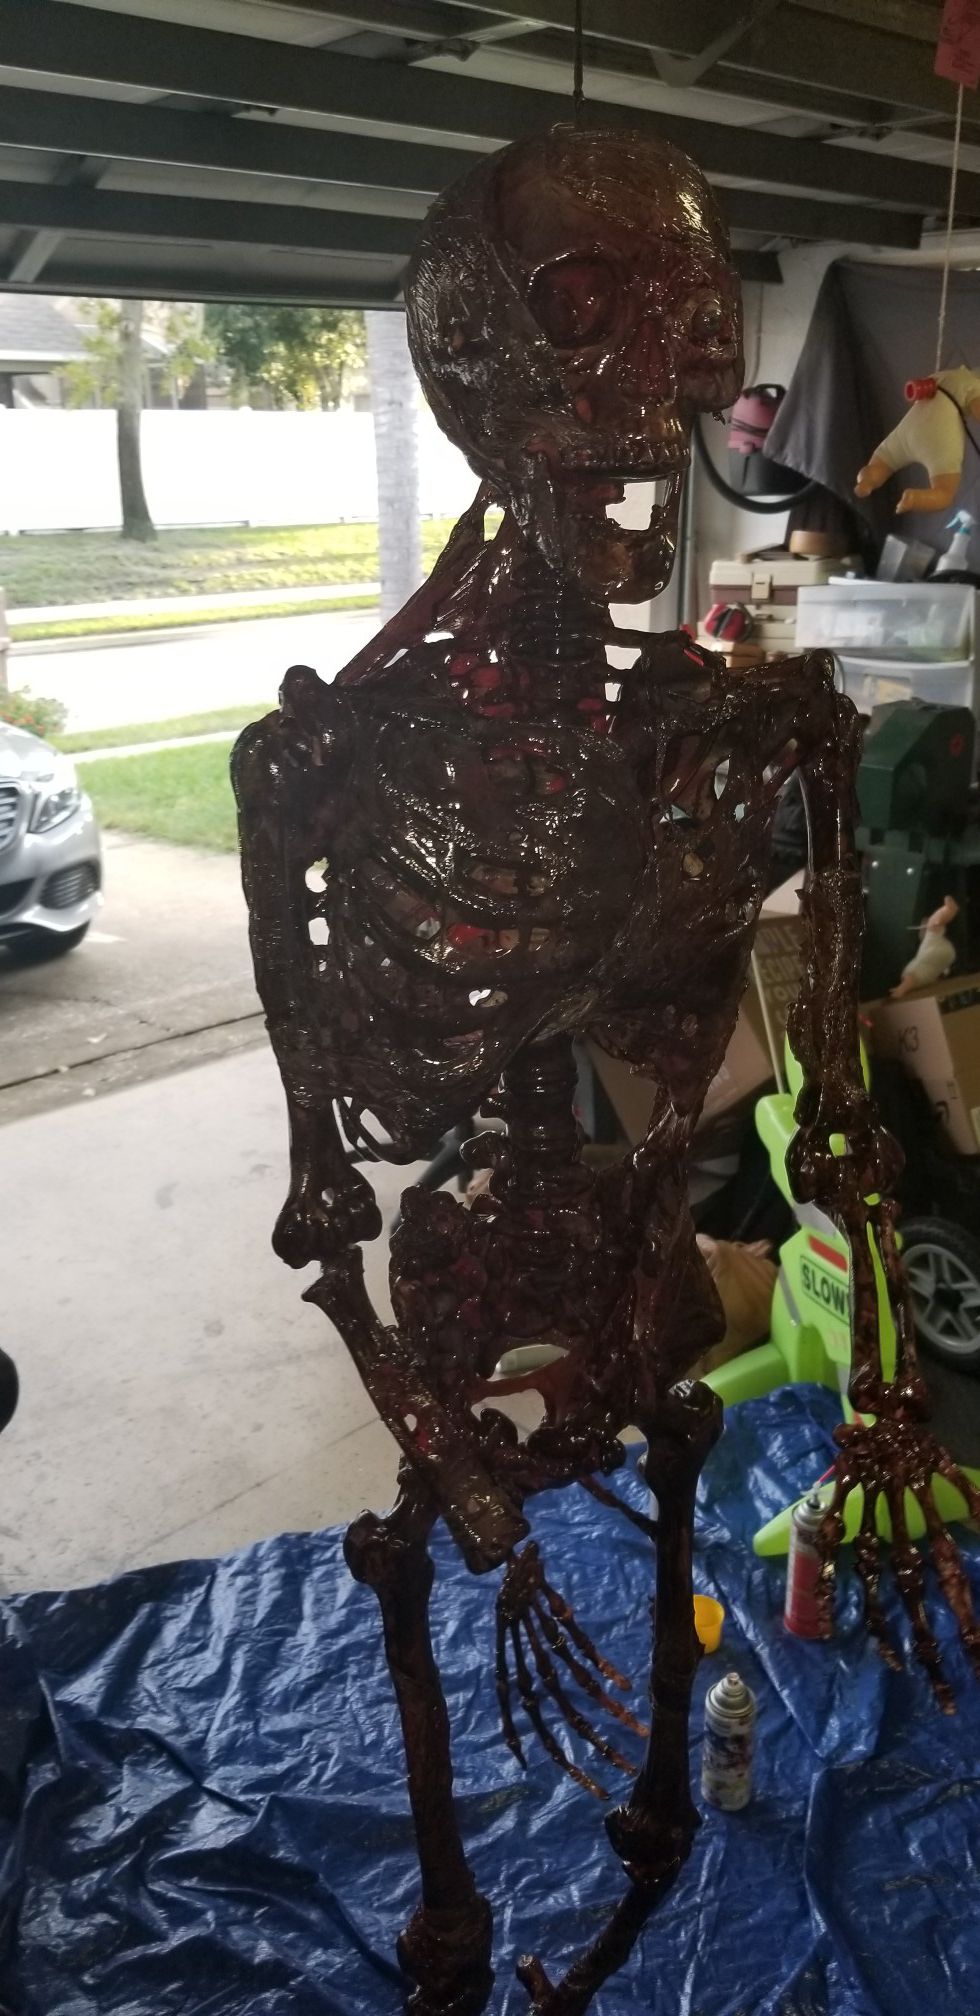 HALLOWEEN Decoration HORROR REALISTIC CORPSES ($120 each)